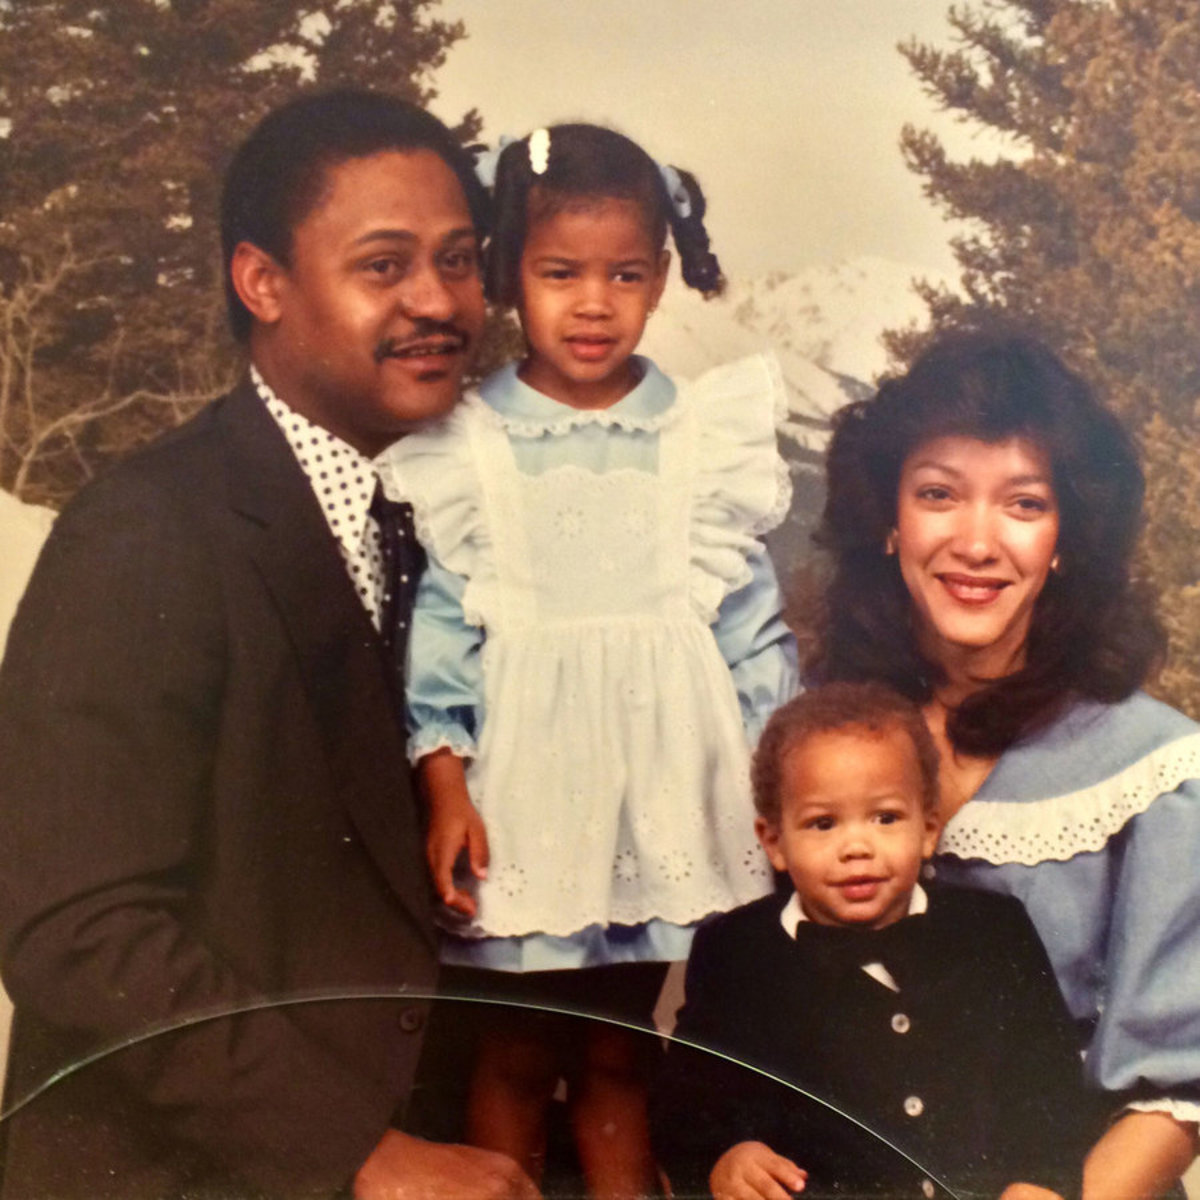 Lee Family Photo with Bivian Lee II, daughter Tamica, wife Cynthia, and son Bivian "Sonny" Lee III